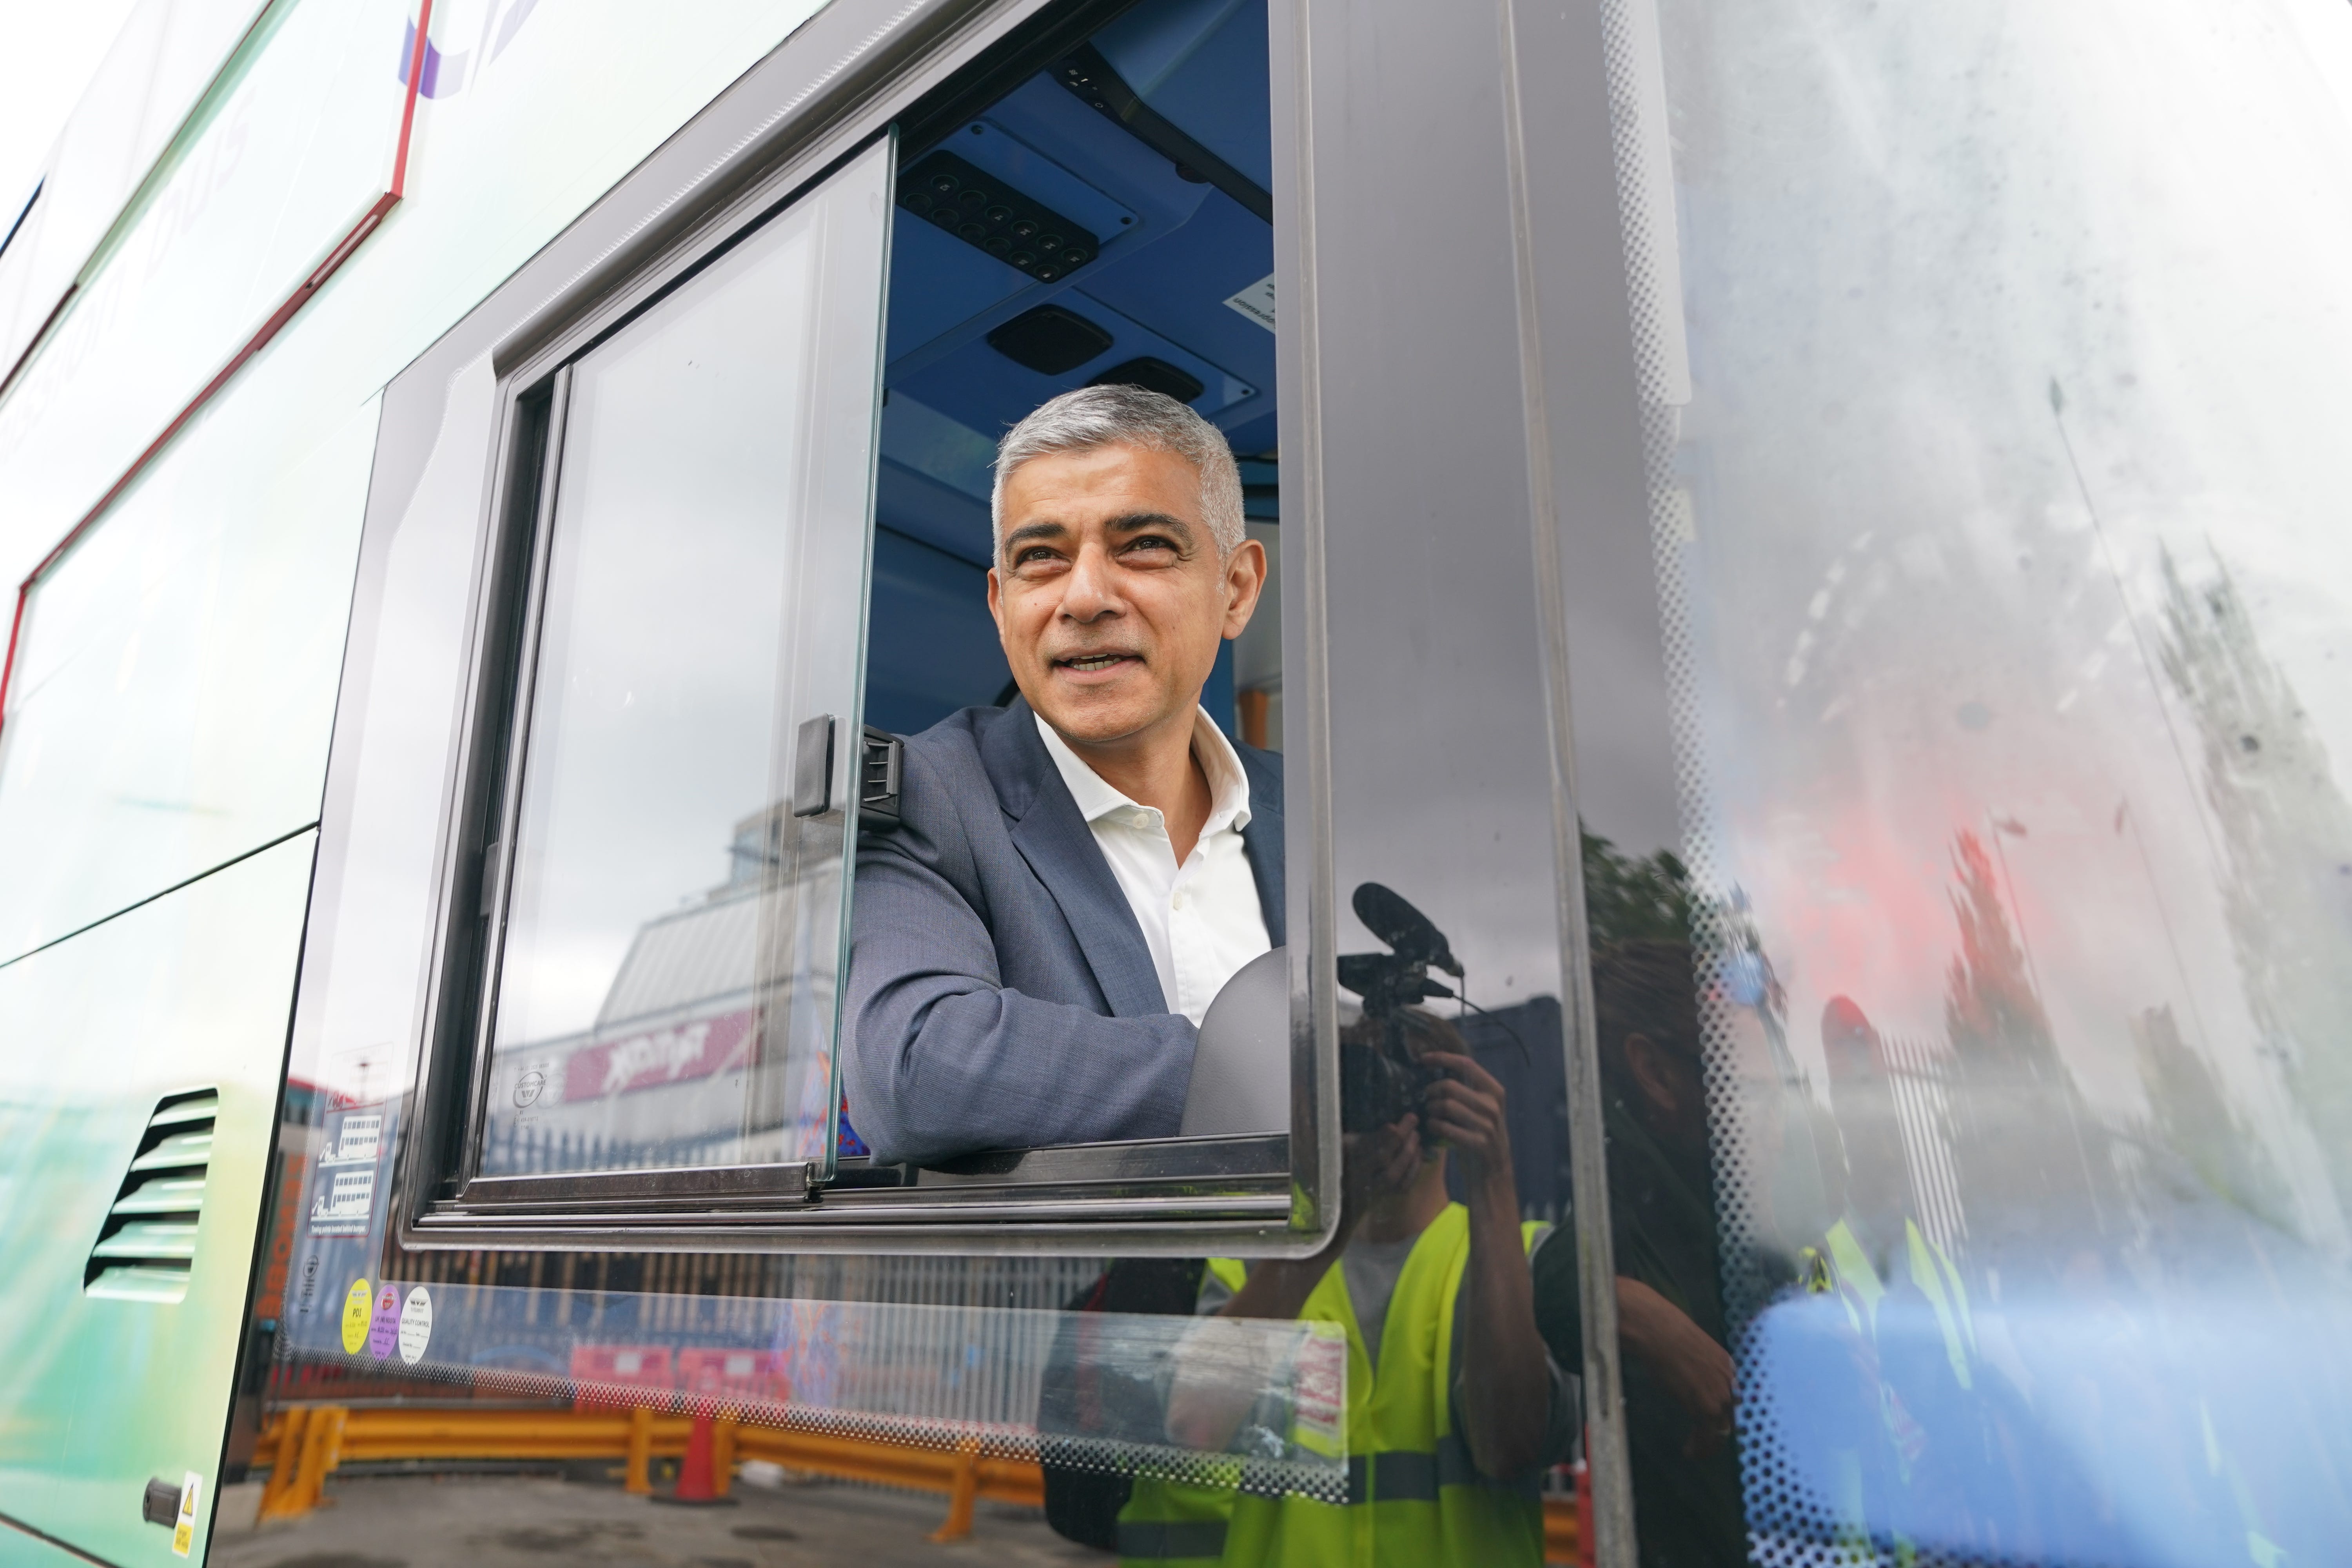 Sadiq Khan has pledged to offer a reciprocal scheme for young people studying in the capital as part of mayoral campaign